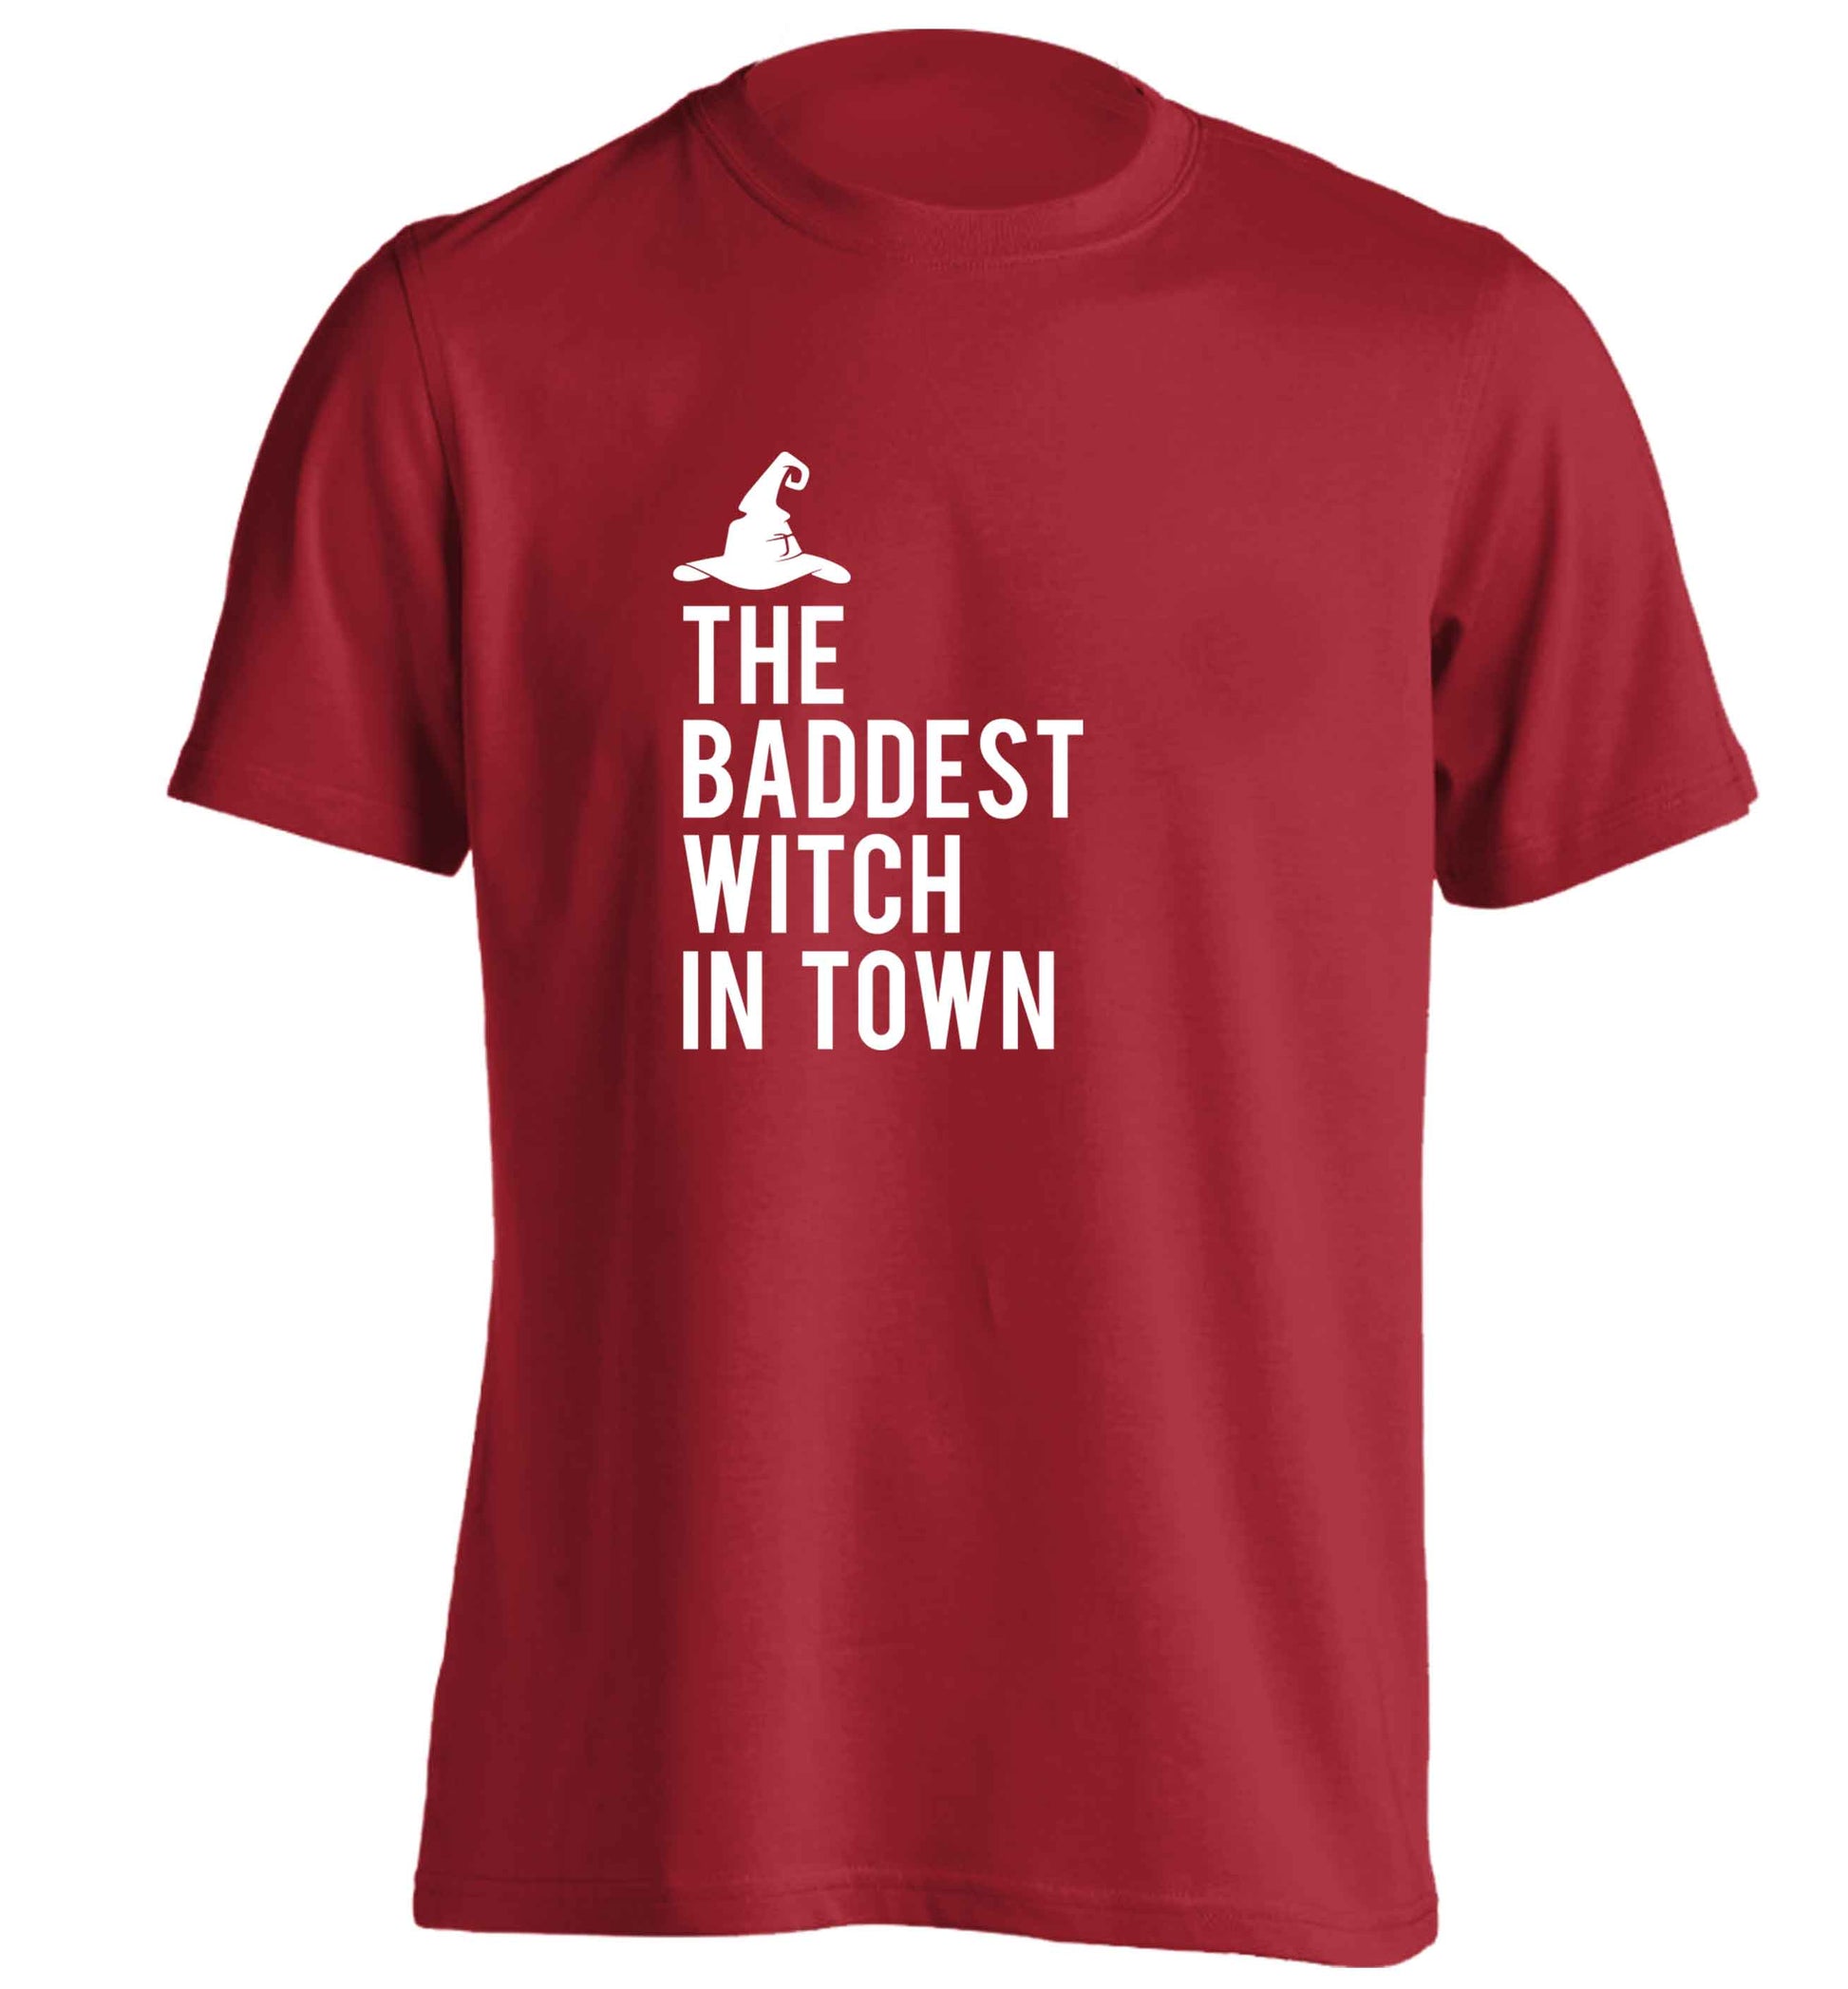 Badest witch in town adults unisex red Tshirt 2XL